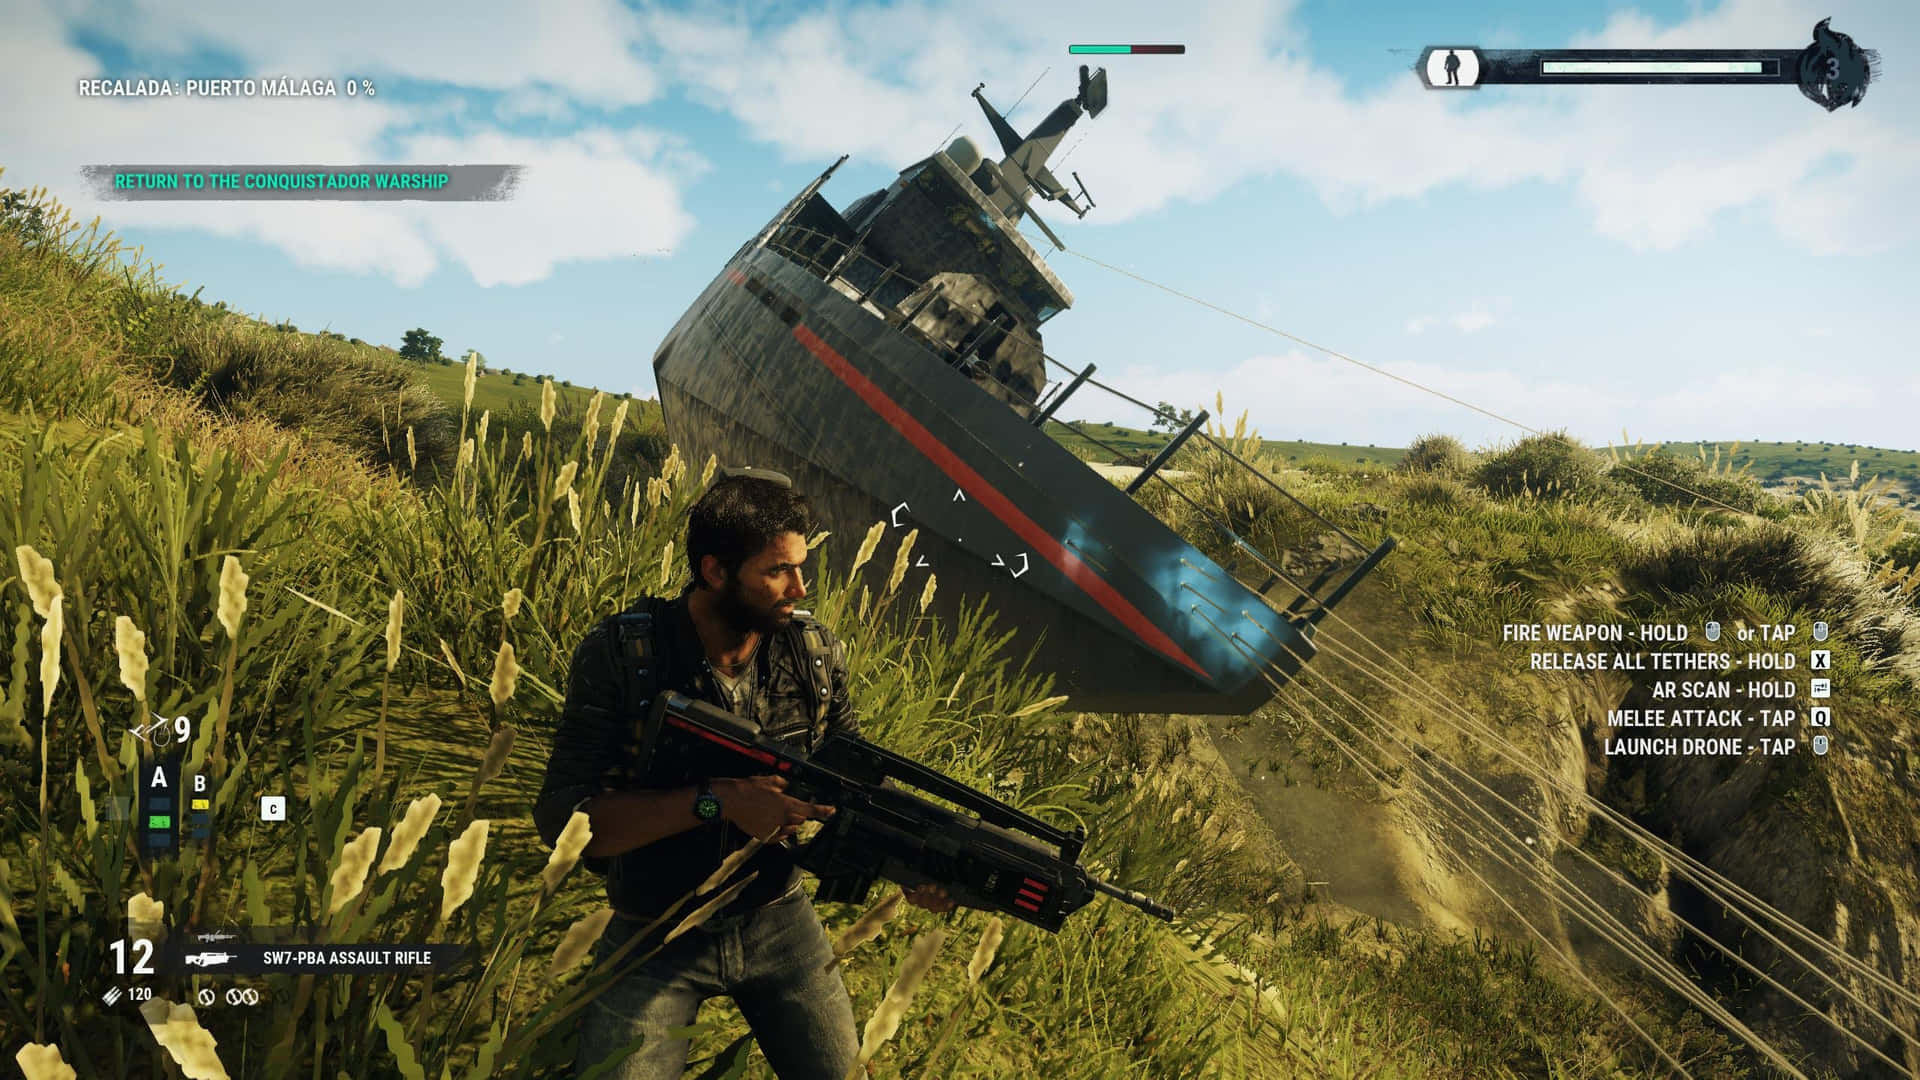 A Man Is Standing In Front Of A Boat In A Video Game